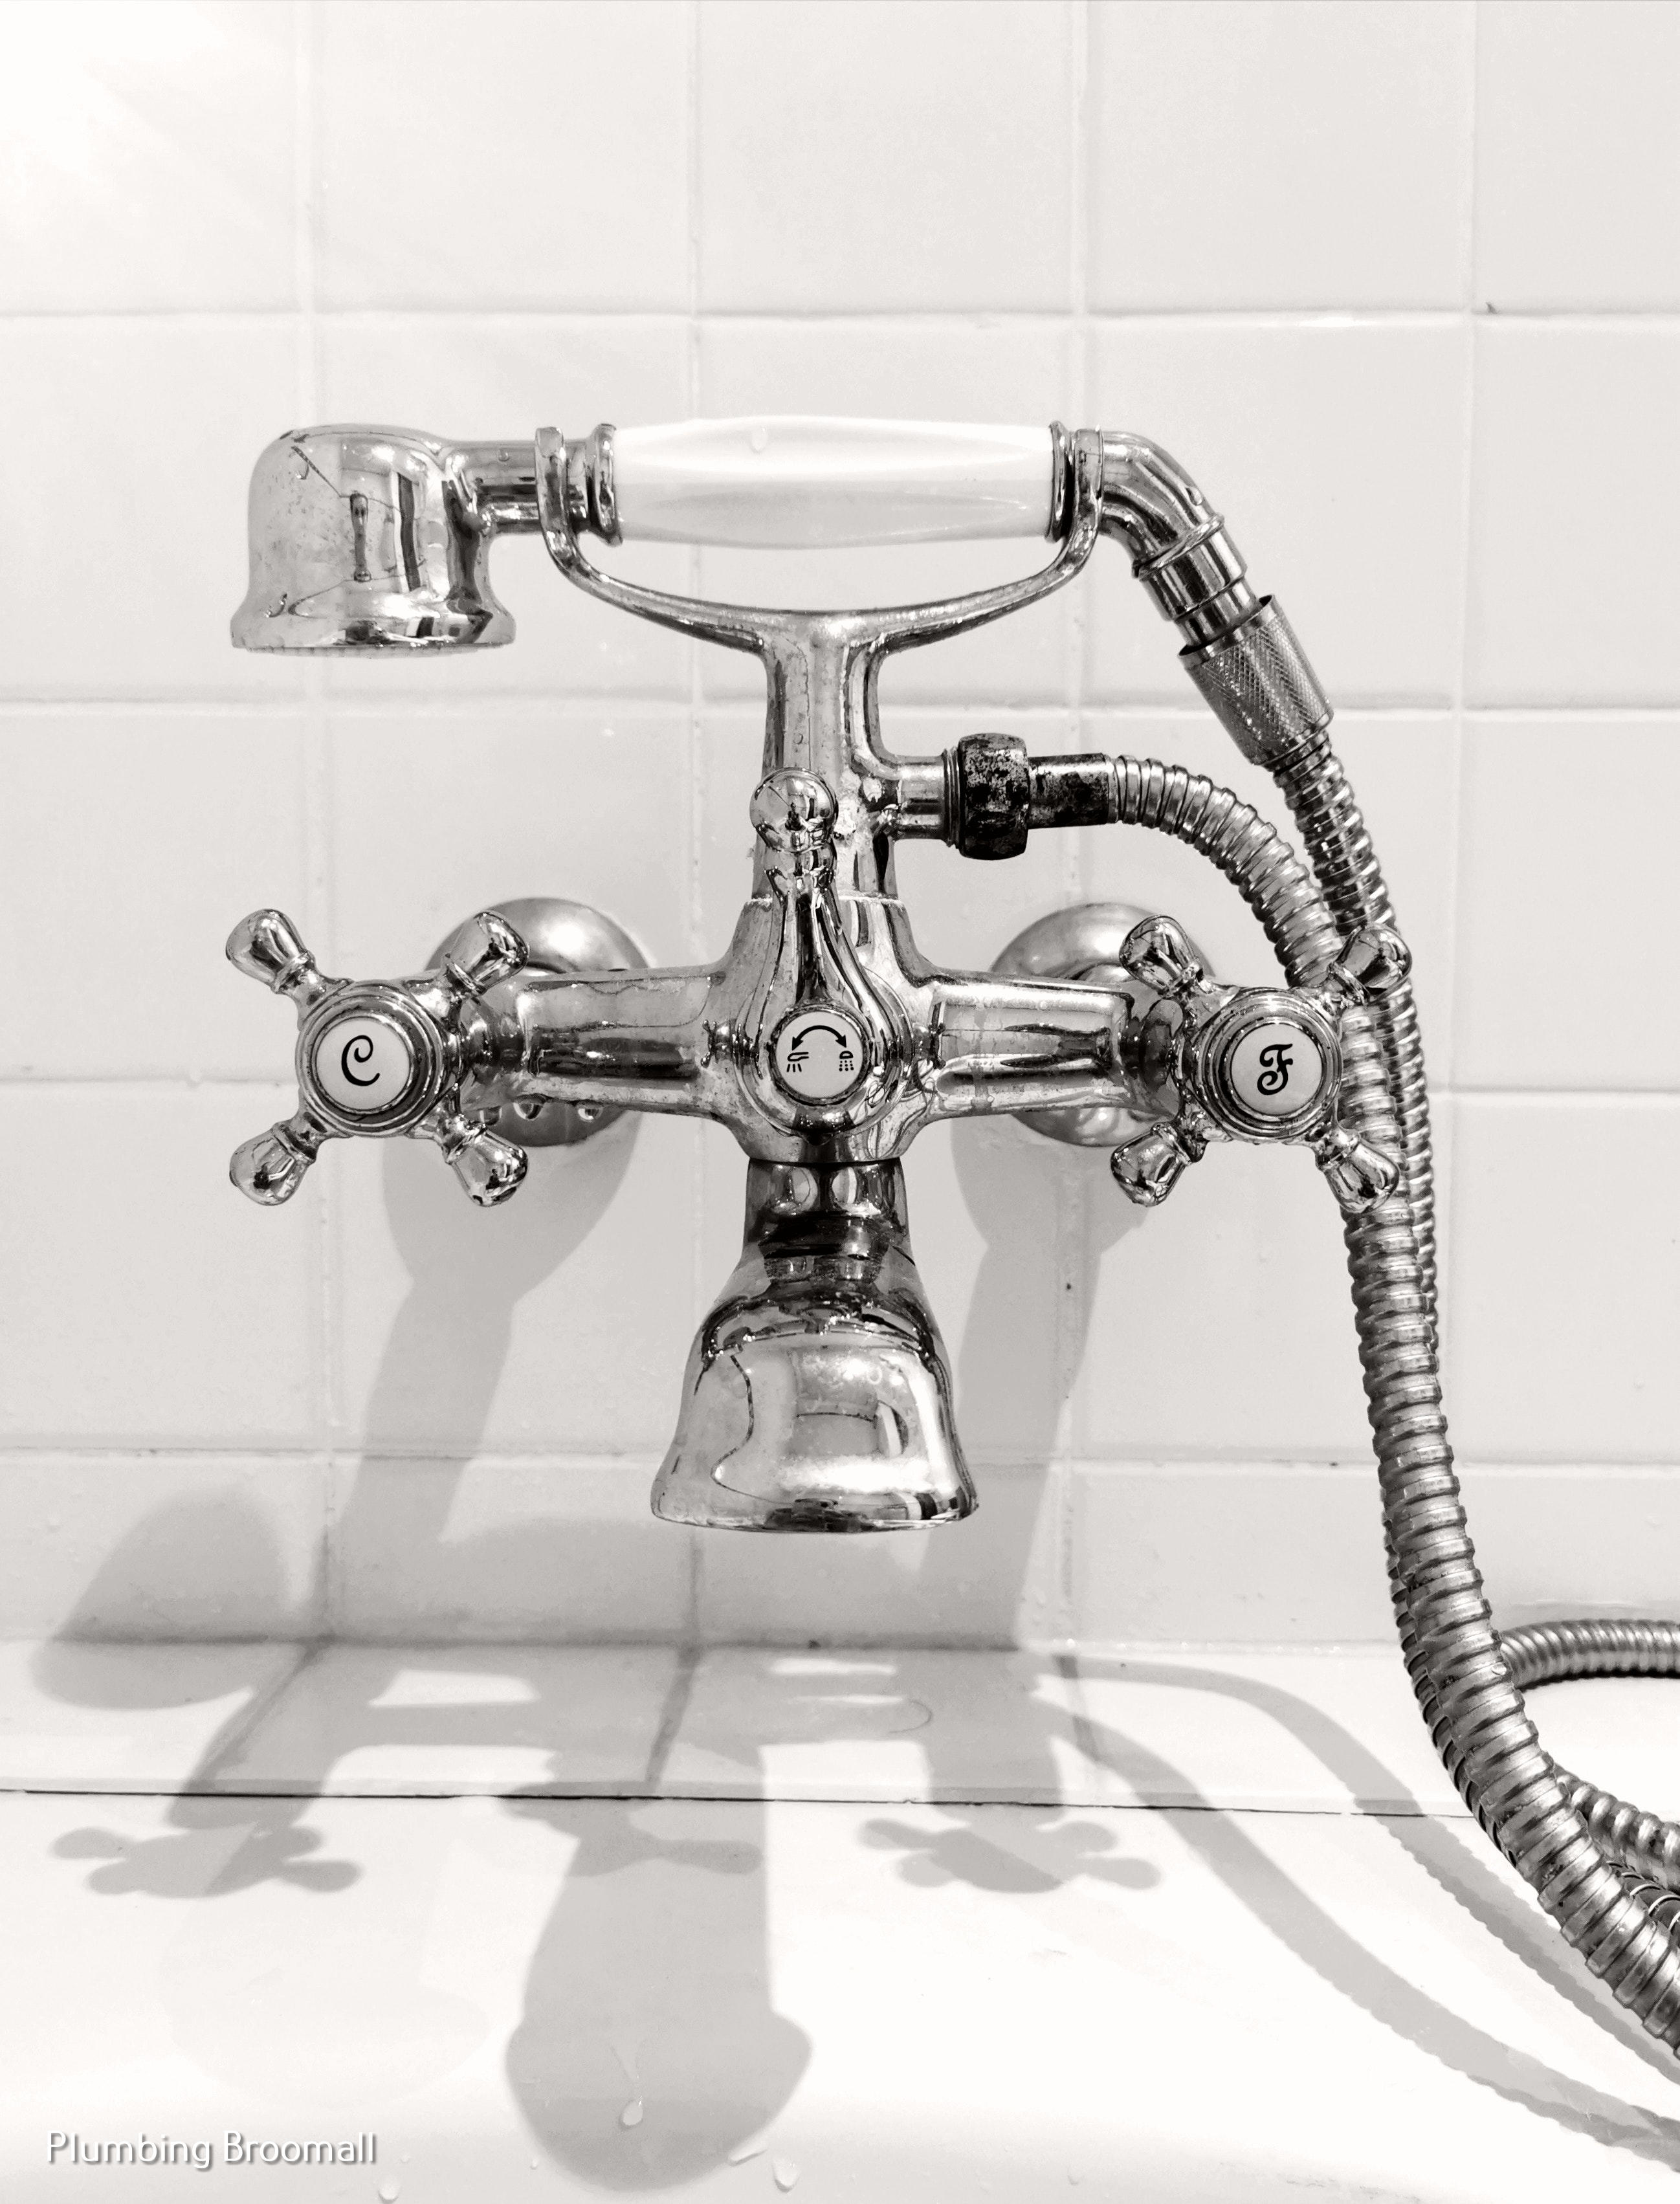 Feehan Plumbing & Heating Highlights the Benefits of Hiring a Licensed Plumbing Company